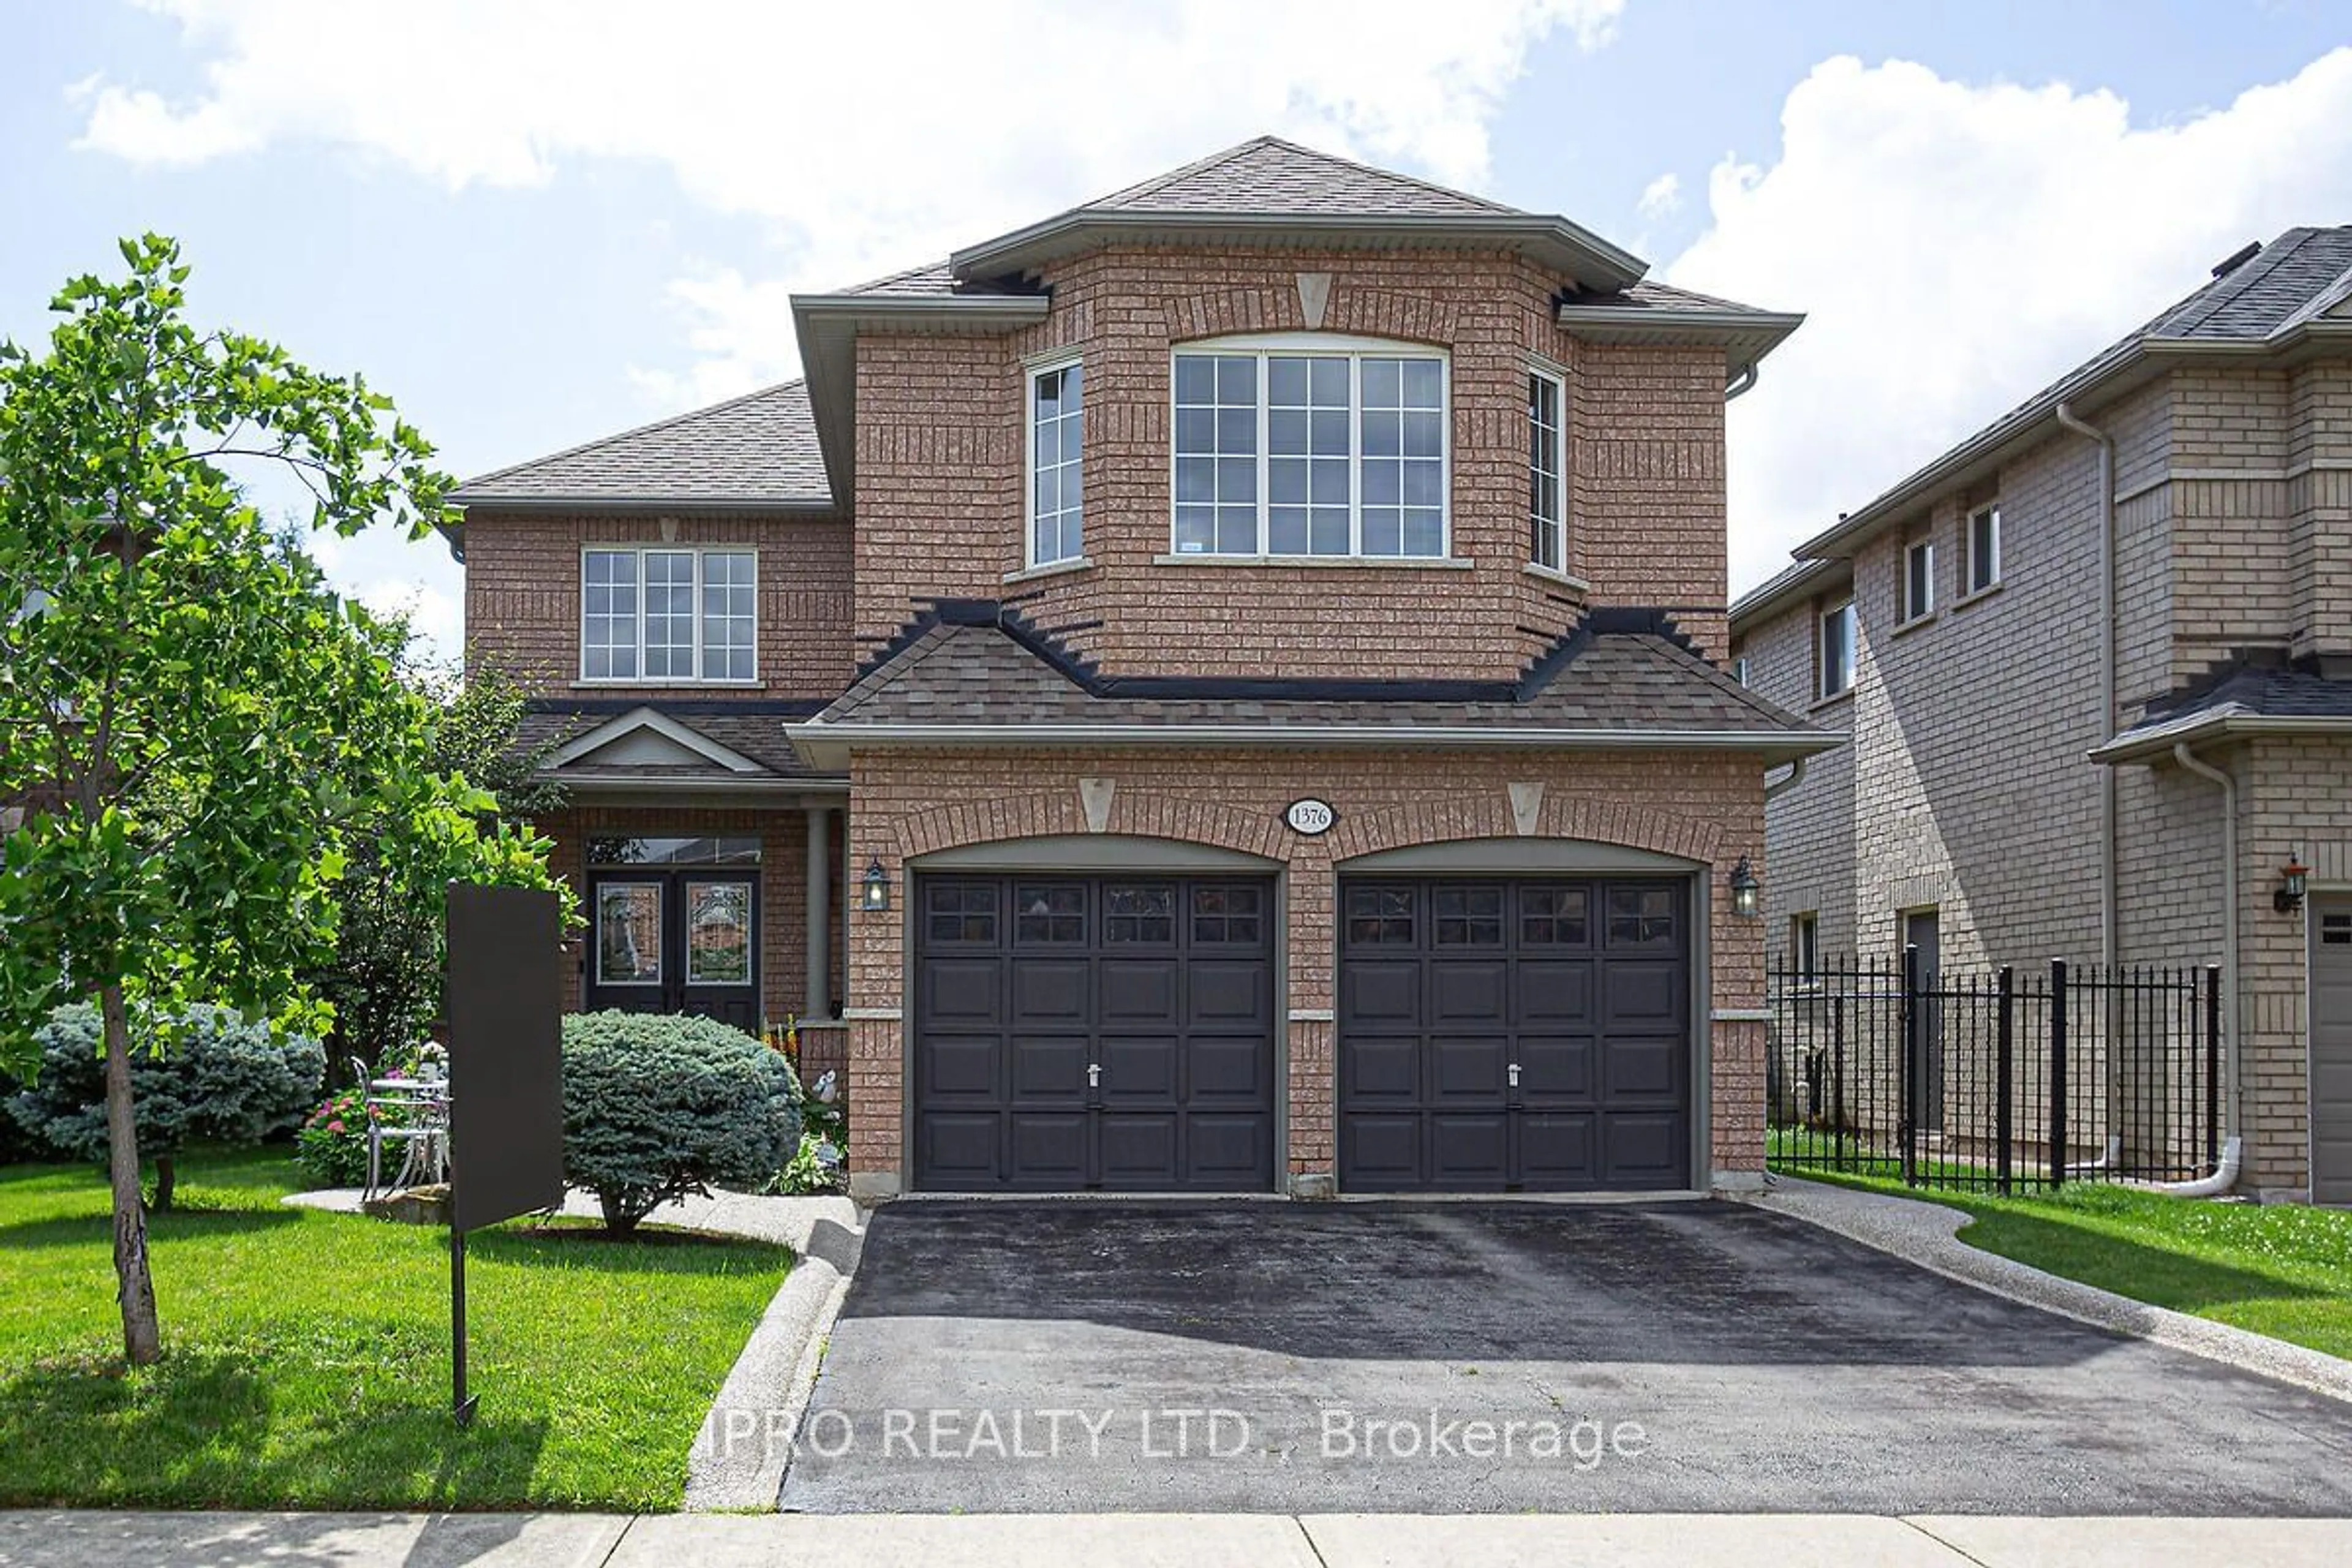 Home with brick exterior material for 1376 Kingsgrove Pl, Oakville Ontario L5M 3V9